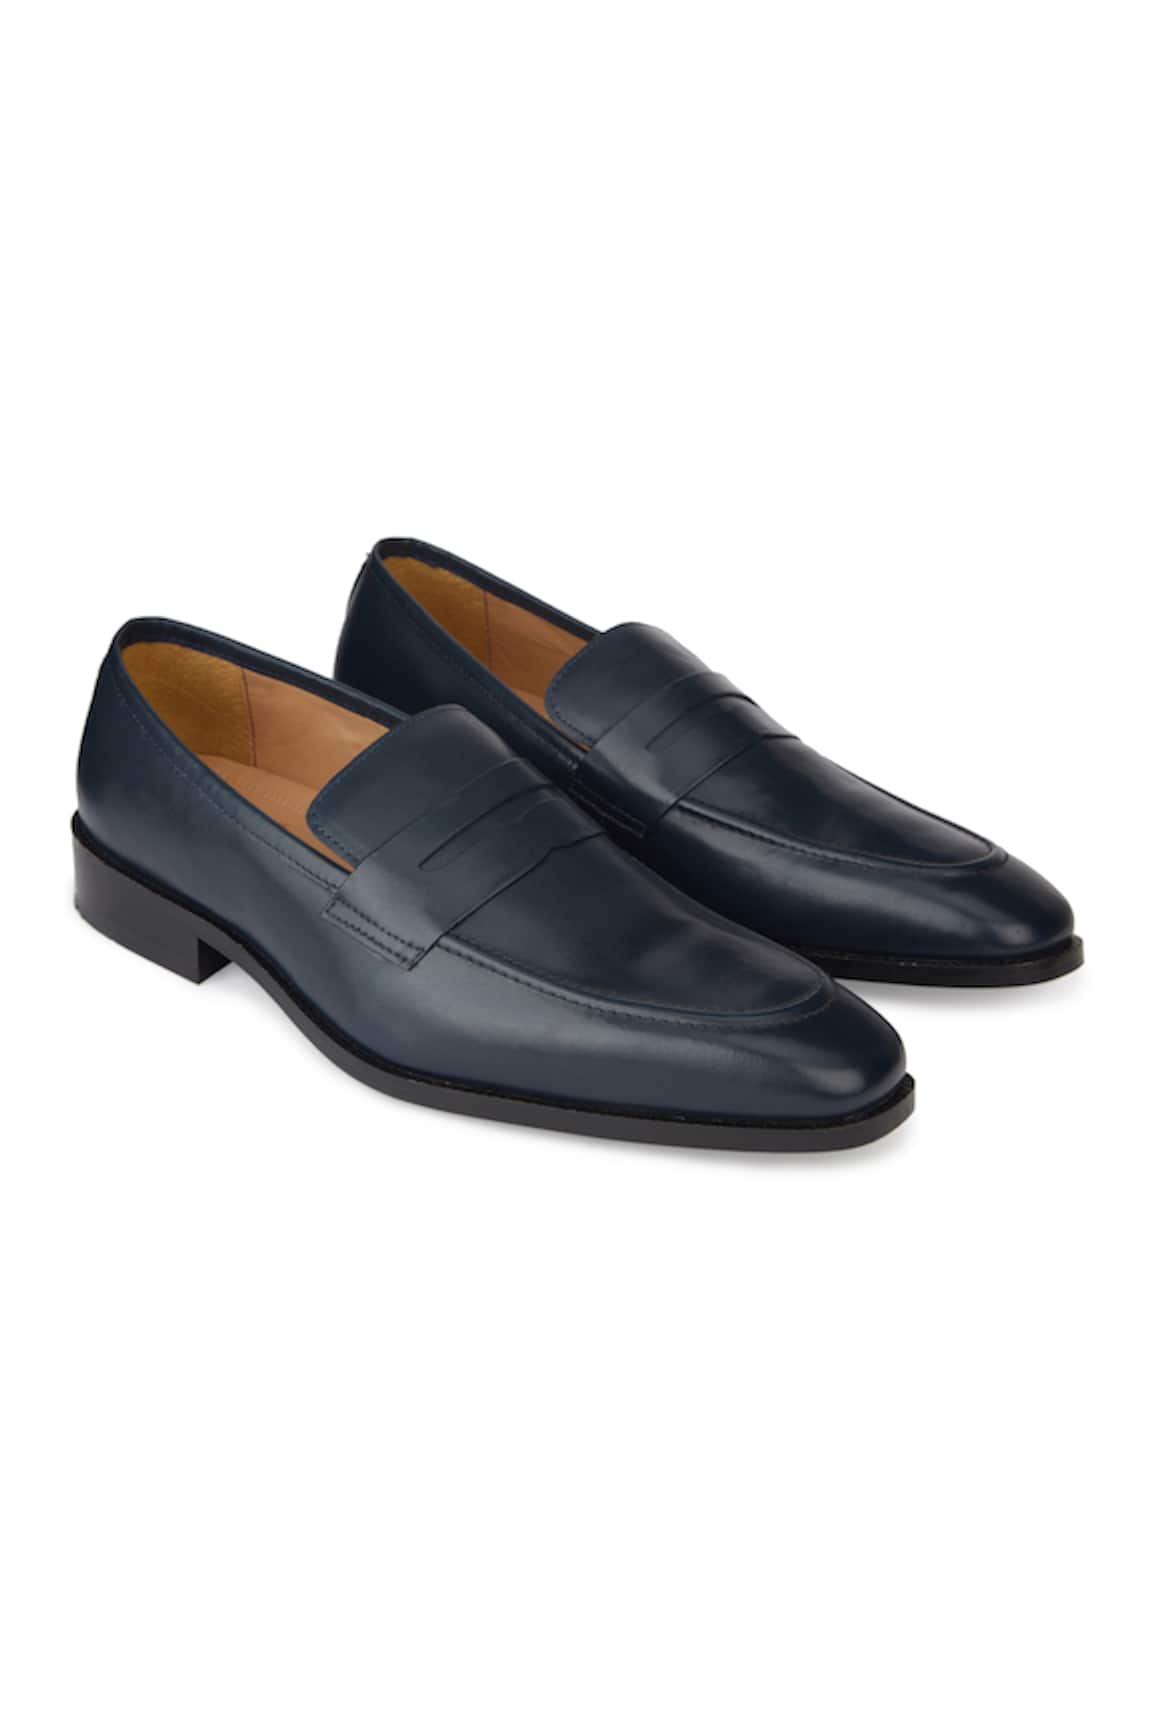 Hats Off Accessories Pointed Toe Plain Penny Loafers